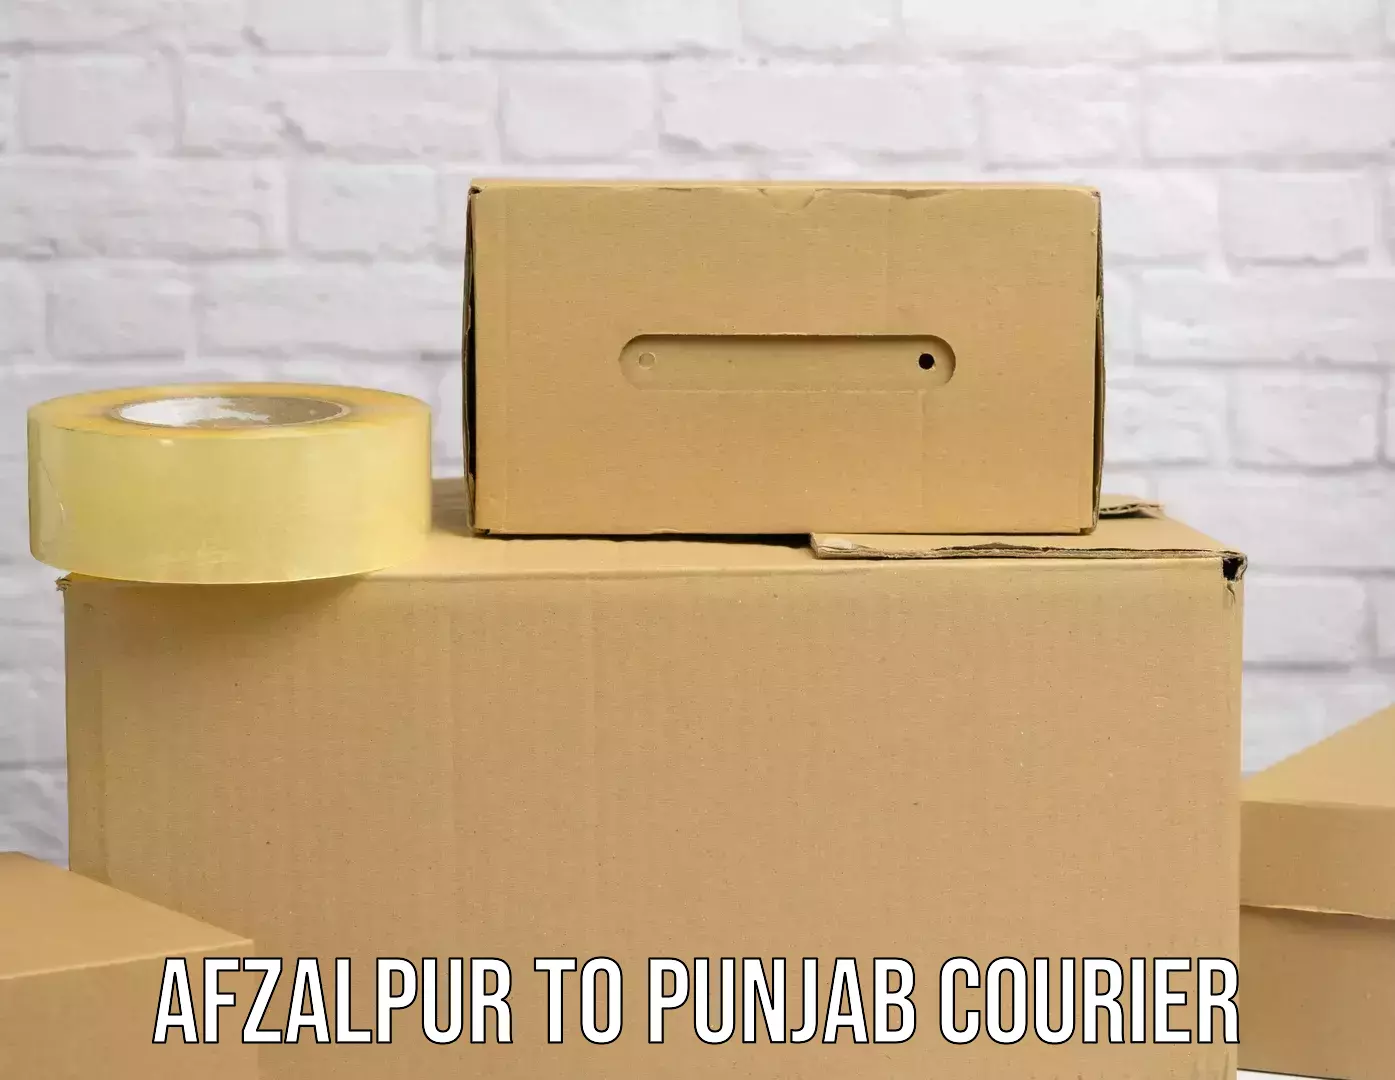 Global shipping networks Afzalpur to Pathankot